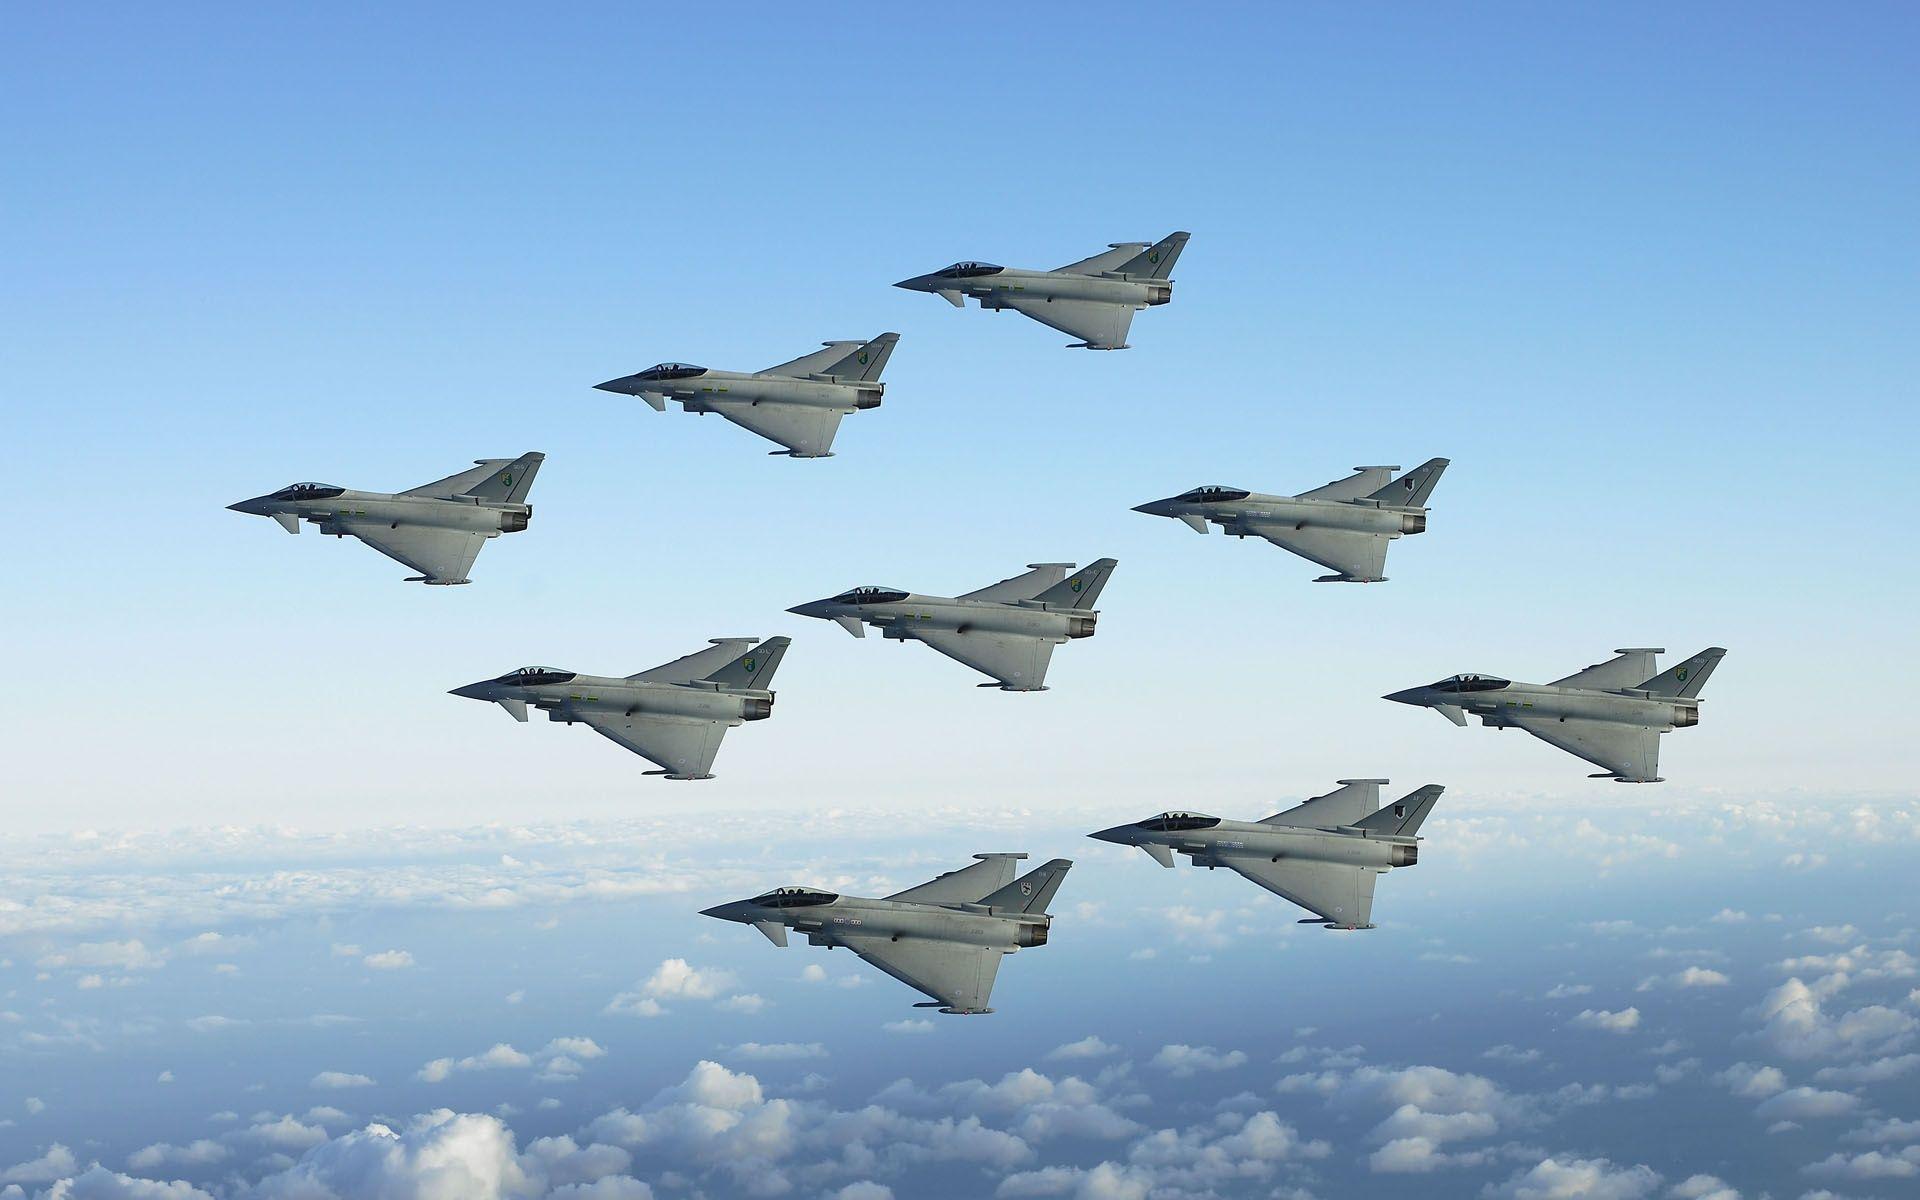 Jet Fighters Sky Formation Position HD Wallpapers in HD